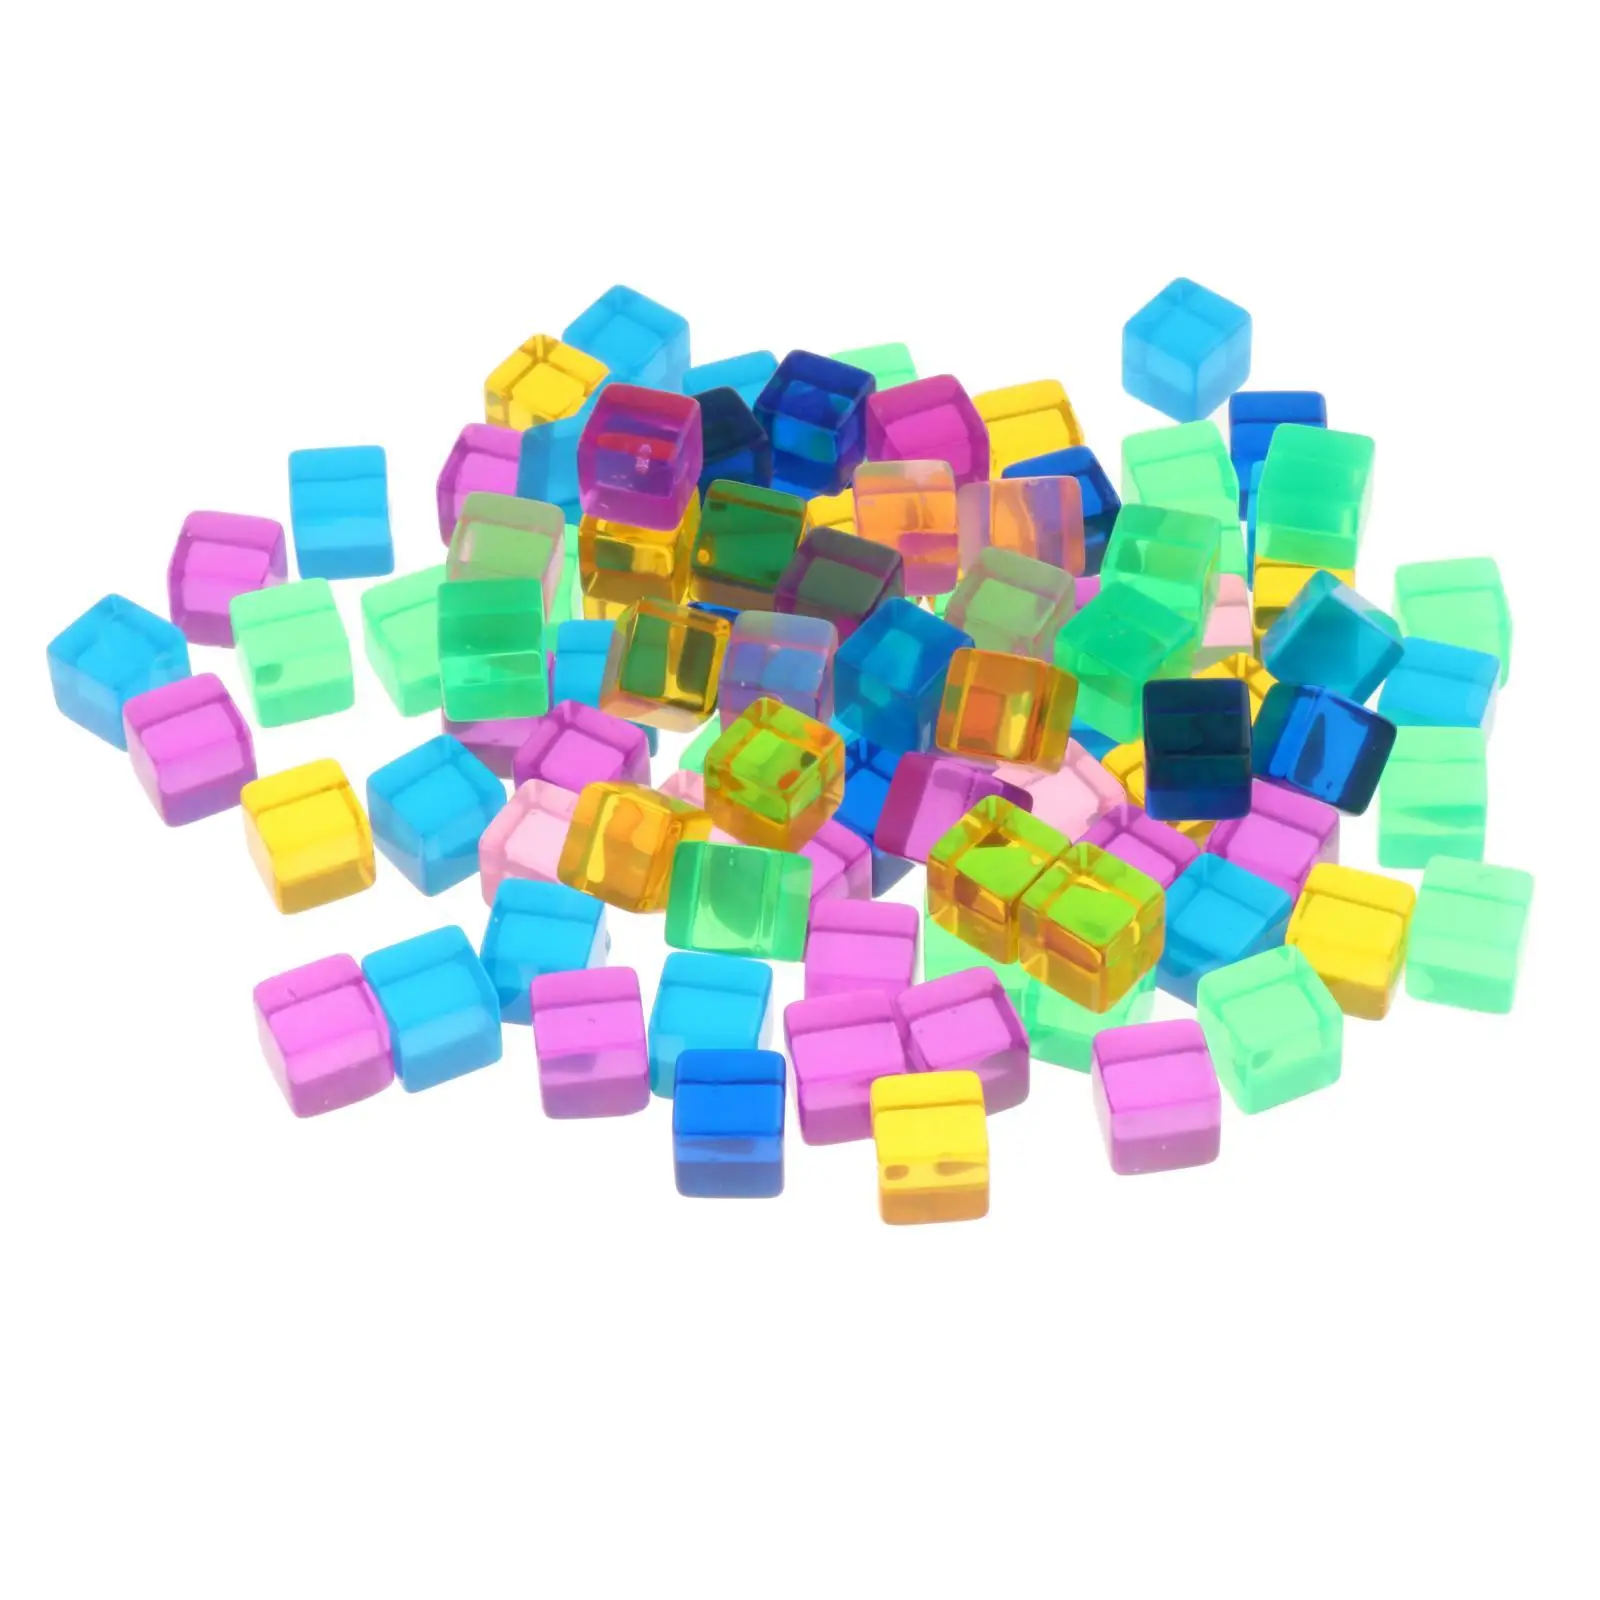 

100Pcs 6 Sided 16mm Transparent Blank Dices Square Corner Colorful Dice Cubes Square Dice for Teaching Math Puzzle Game